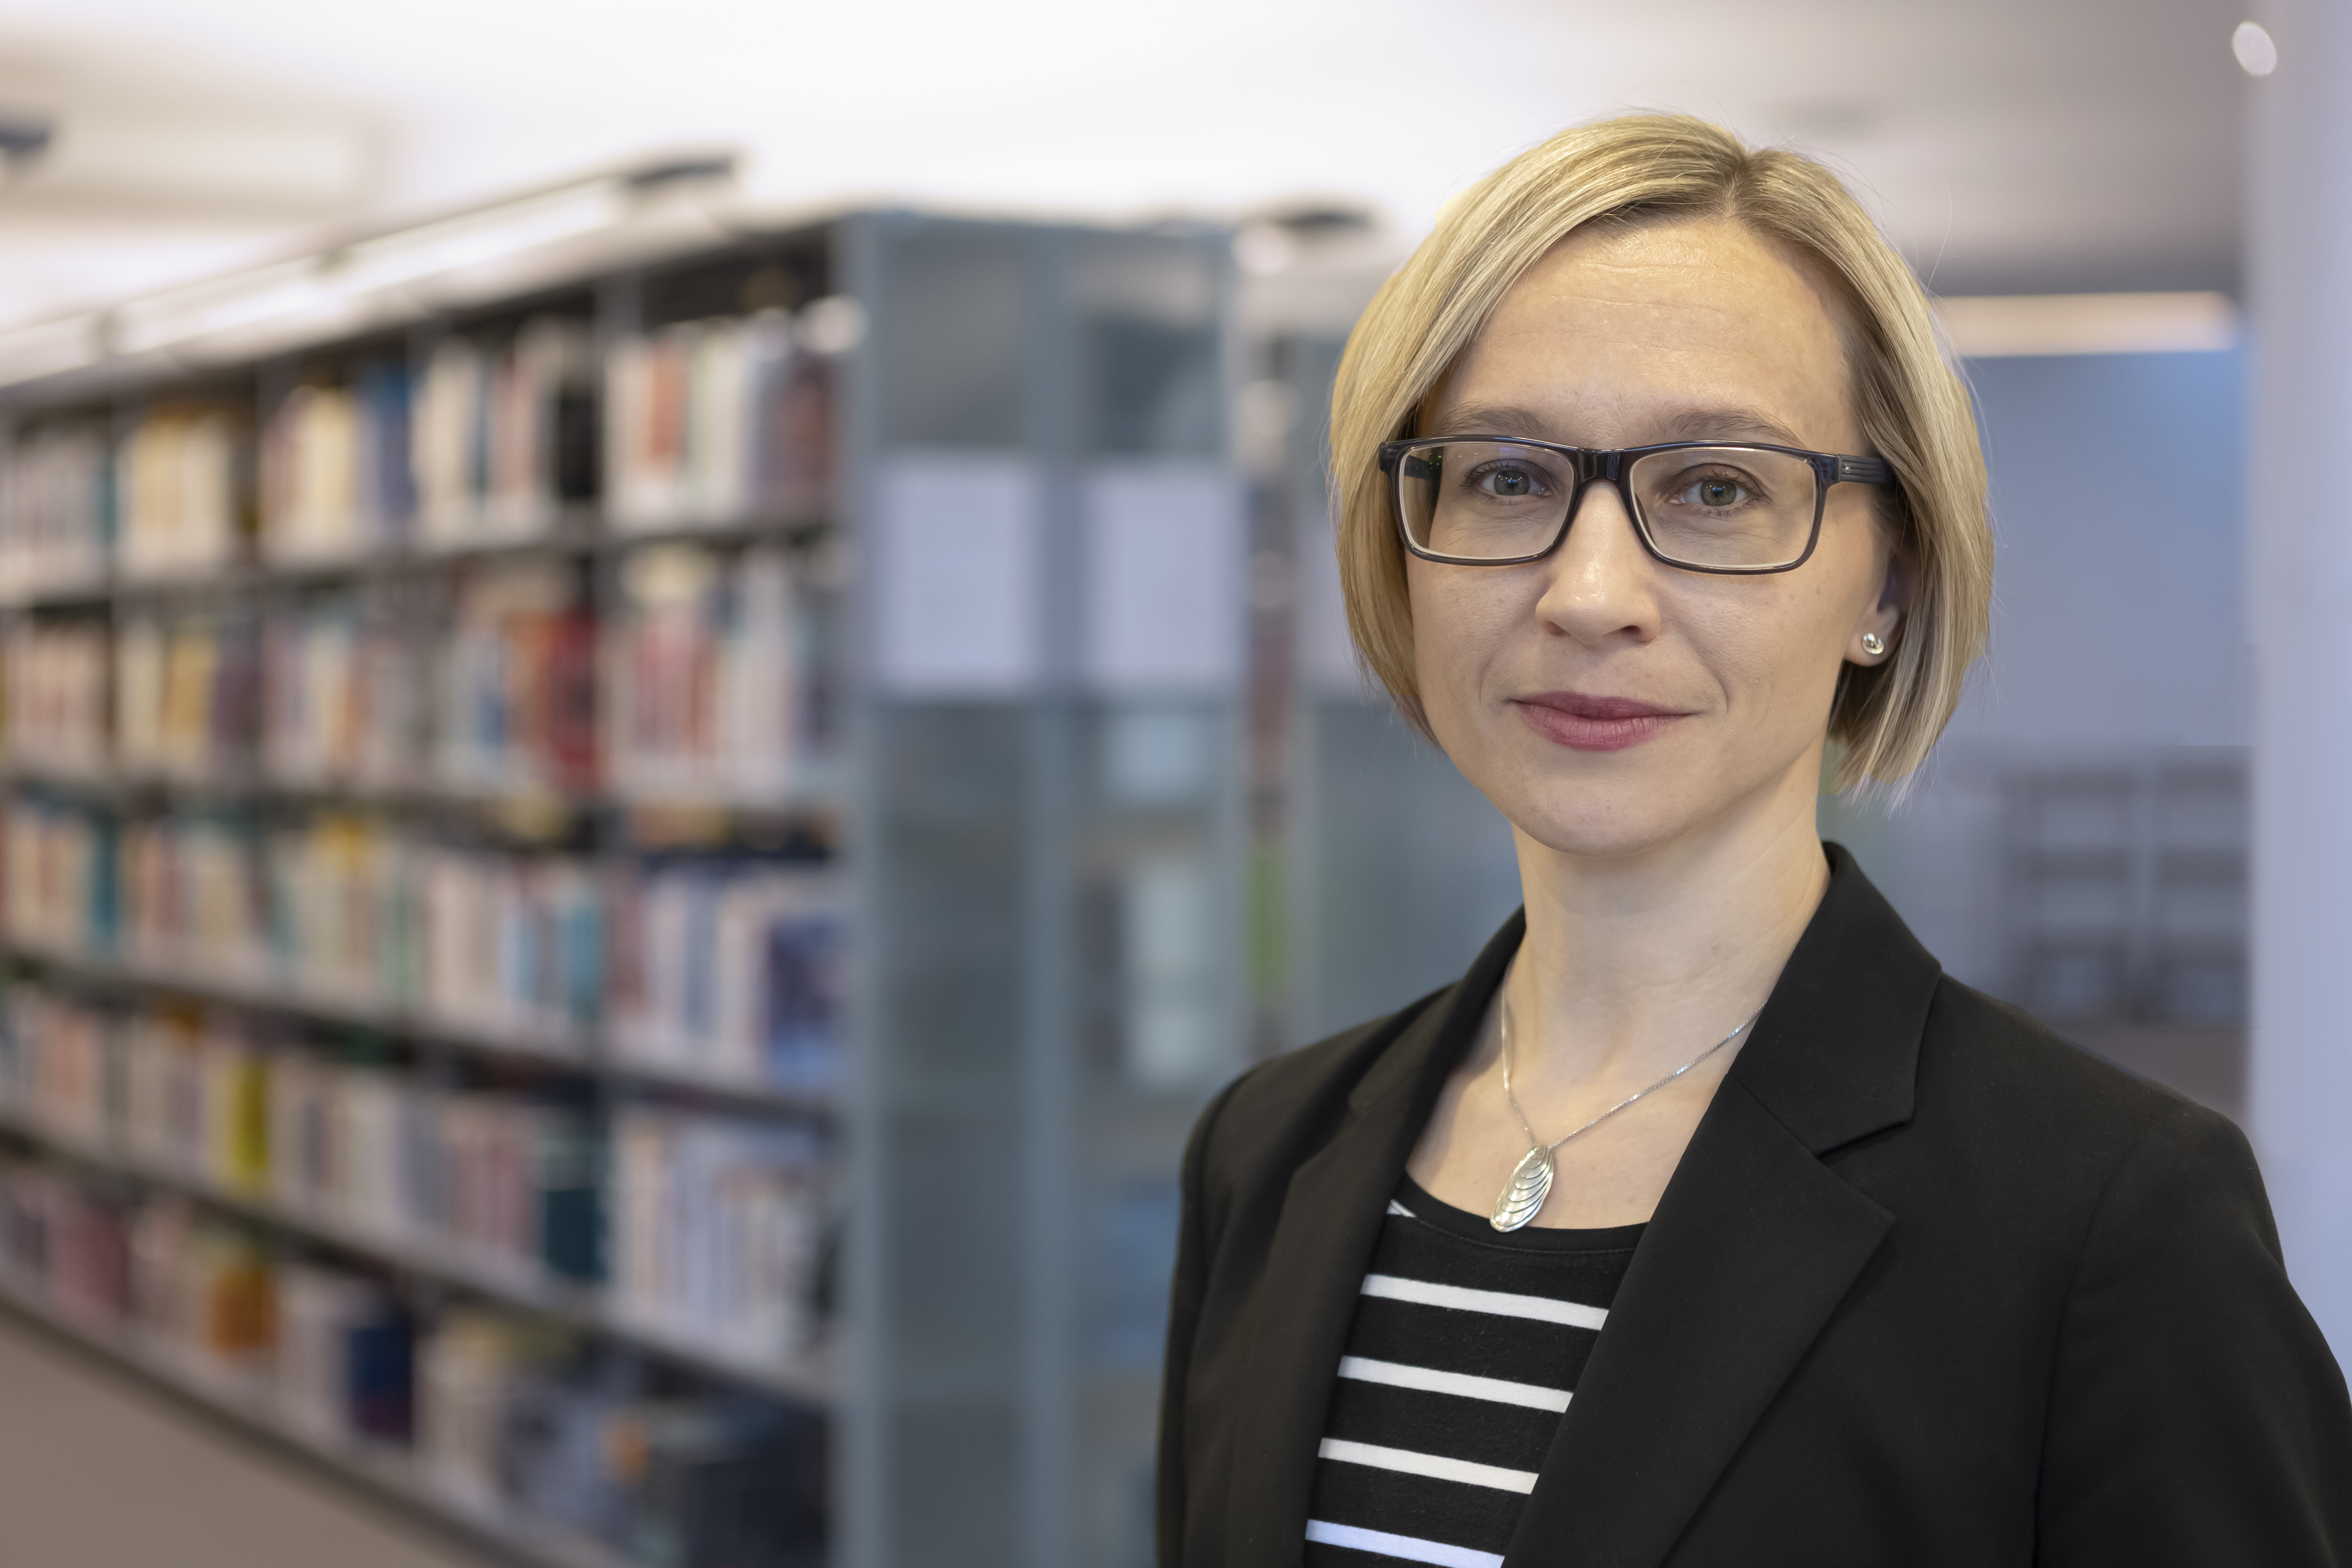 Portrait photo of Anna at a library